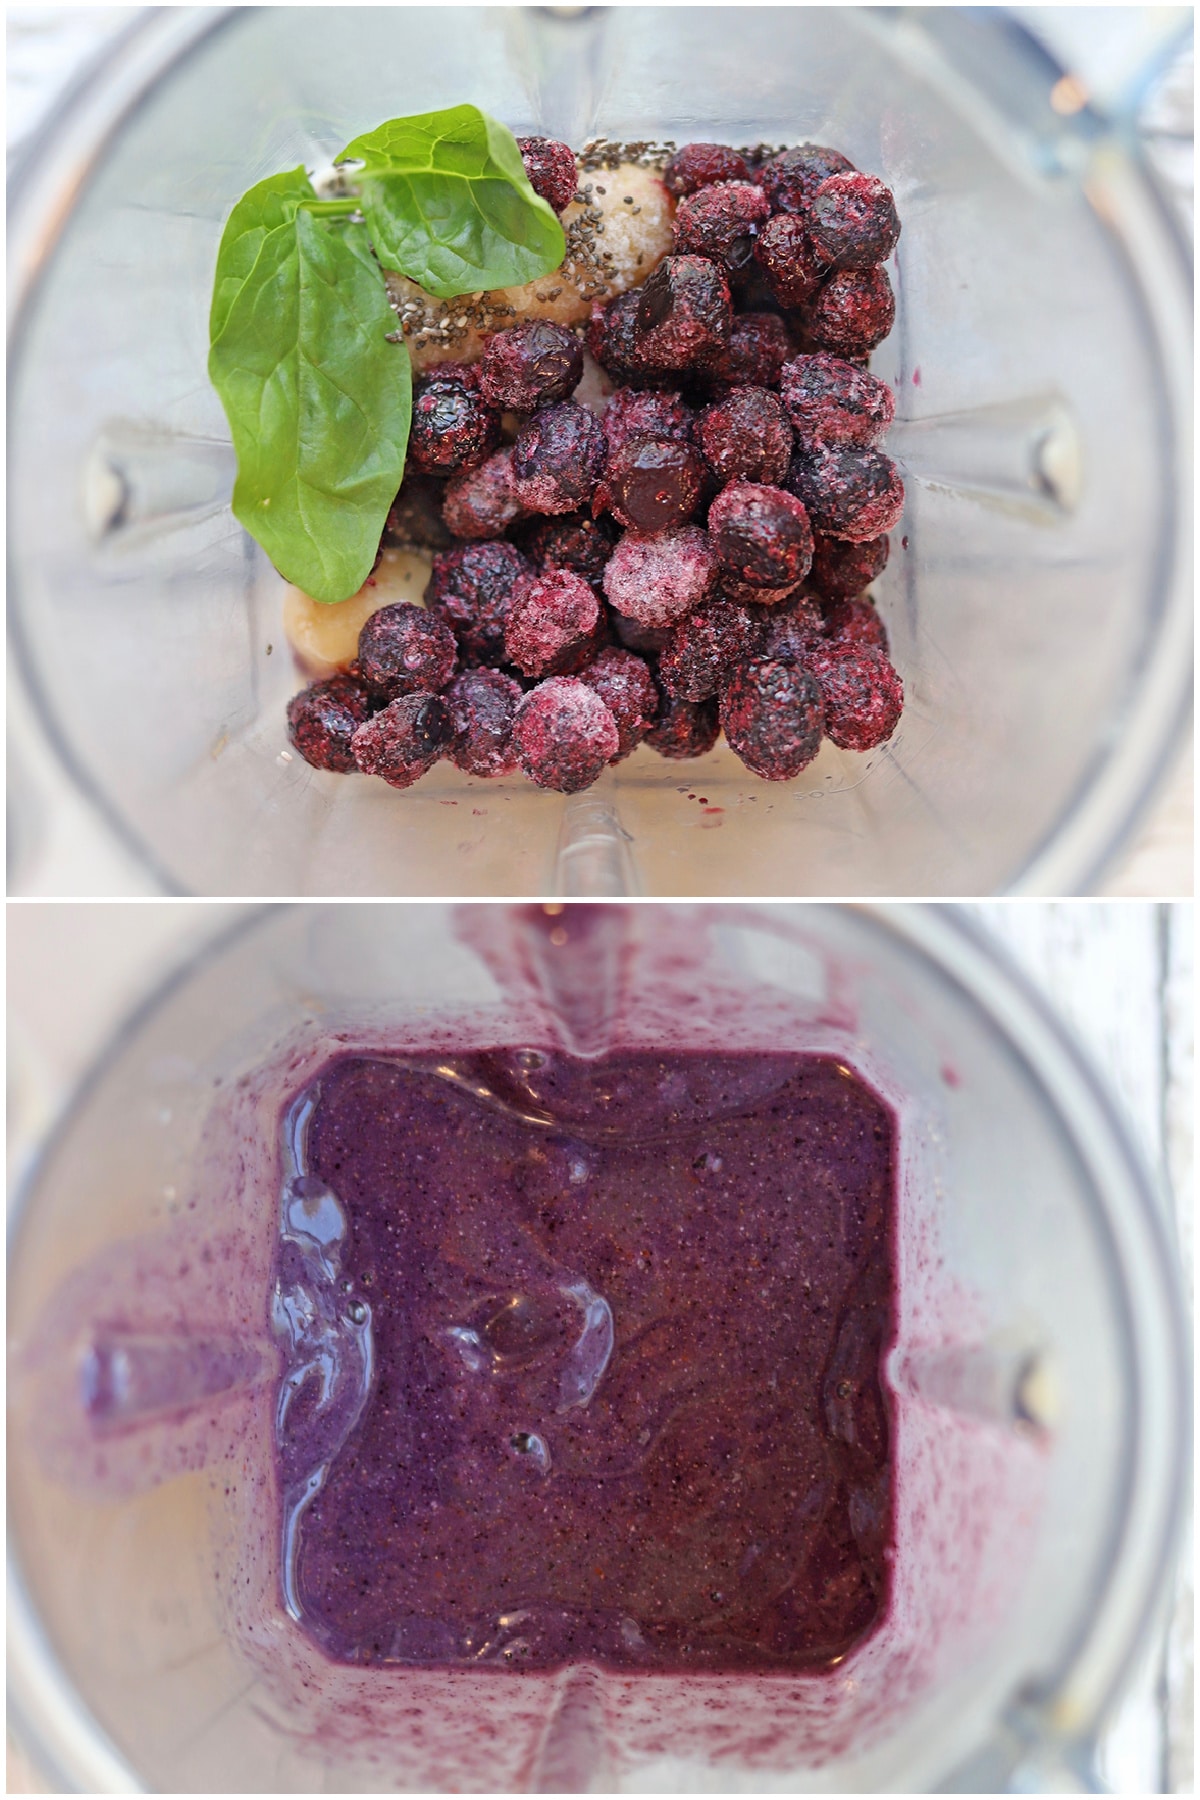 Collage with blueberry smoothie ingredients in blender - before and after blending.